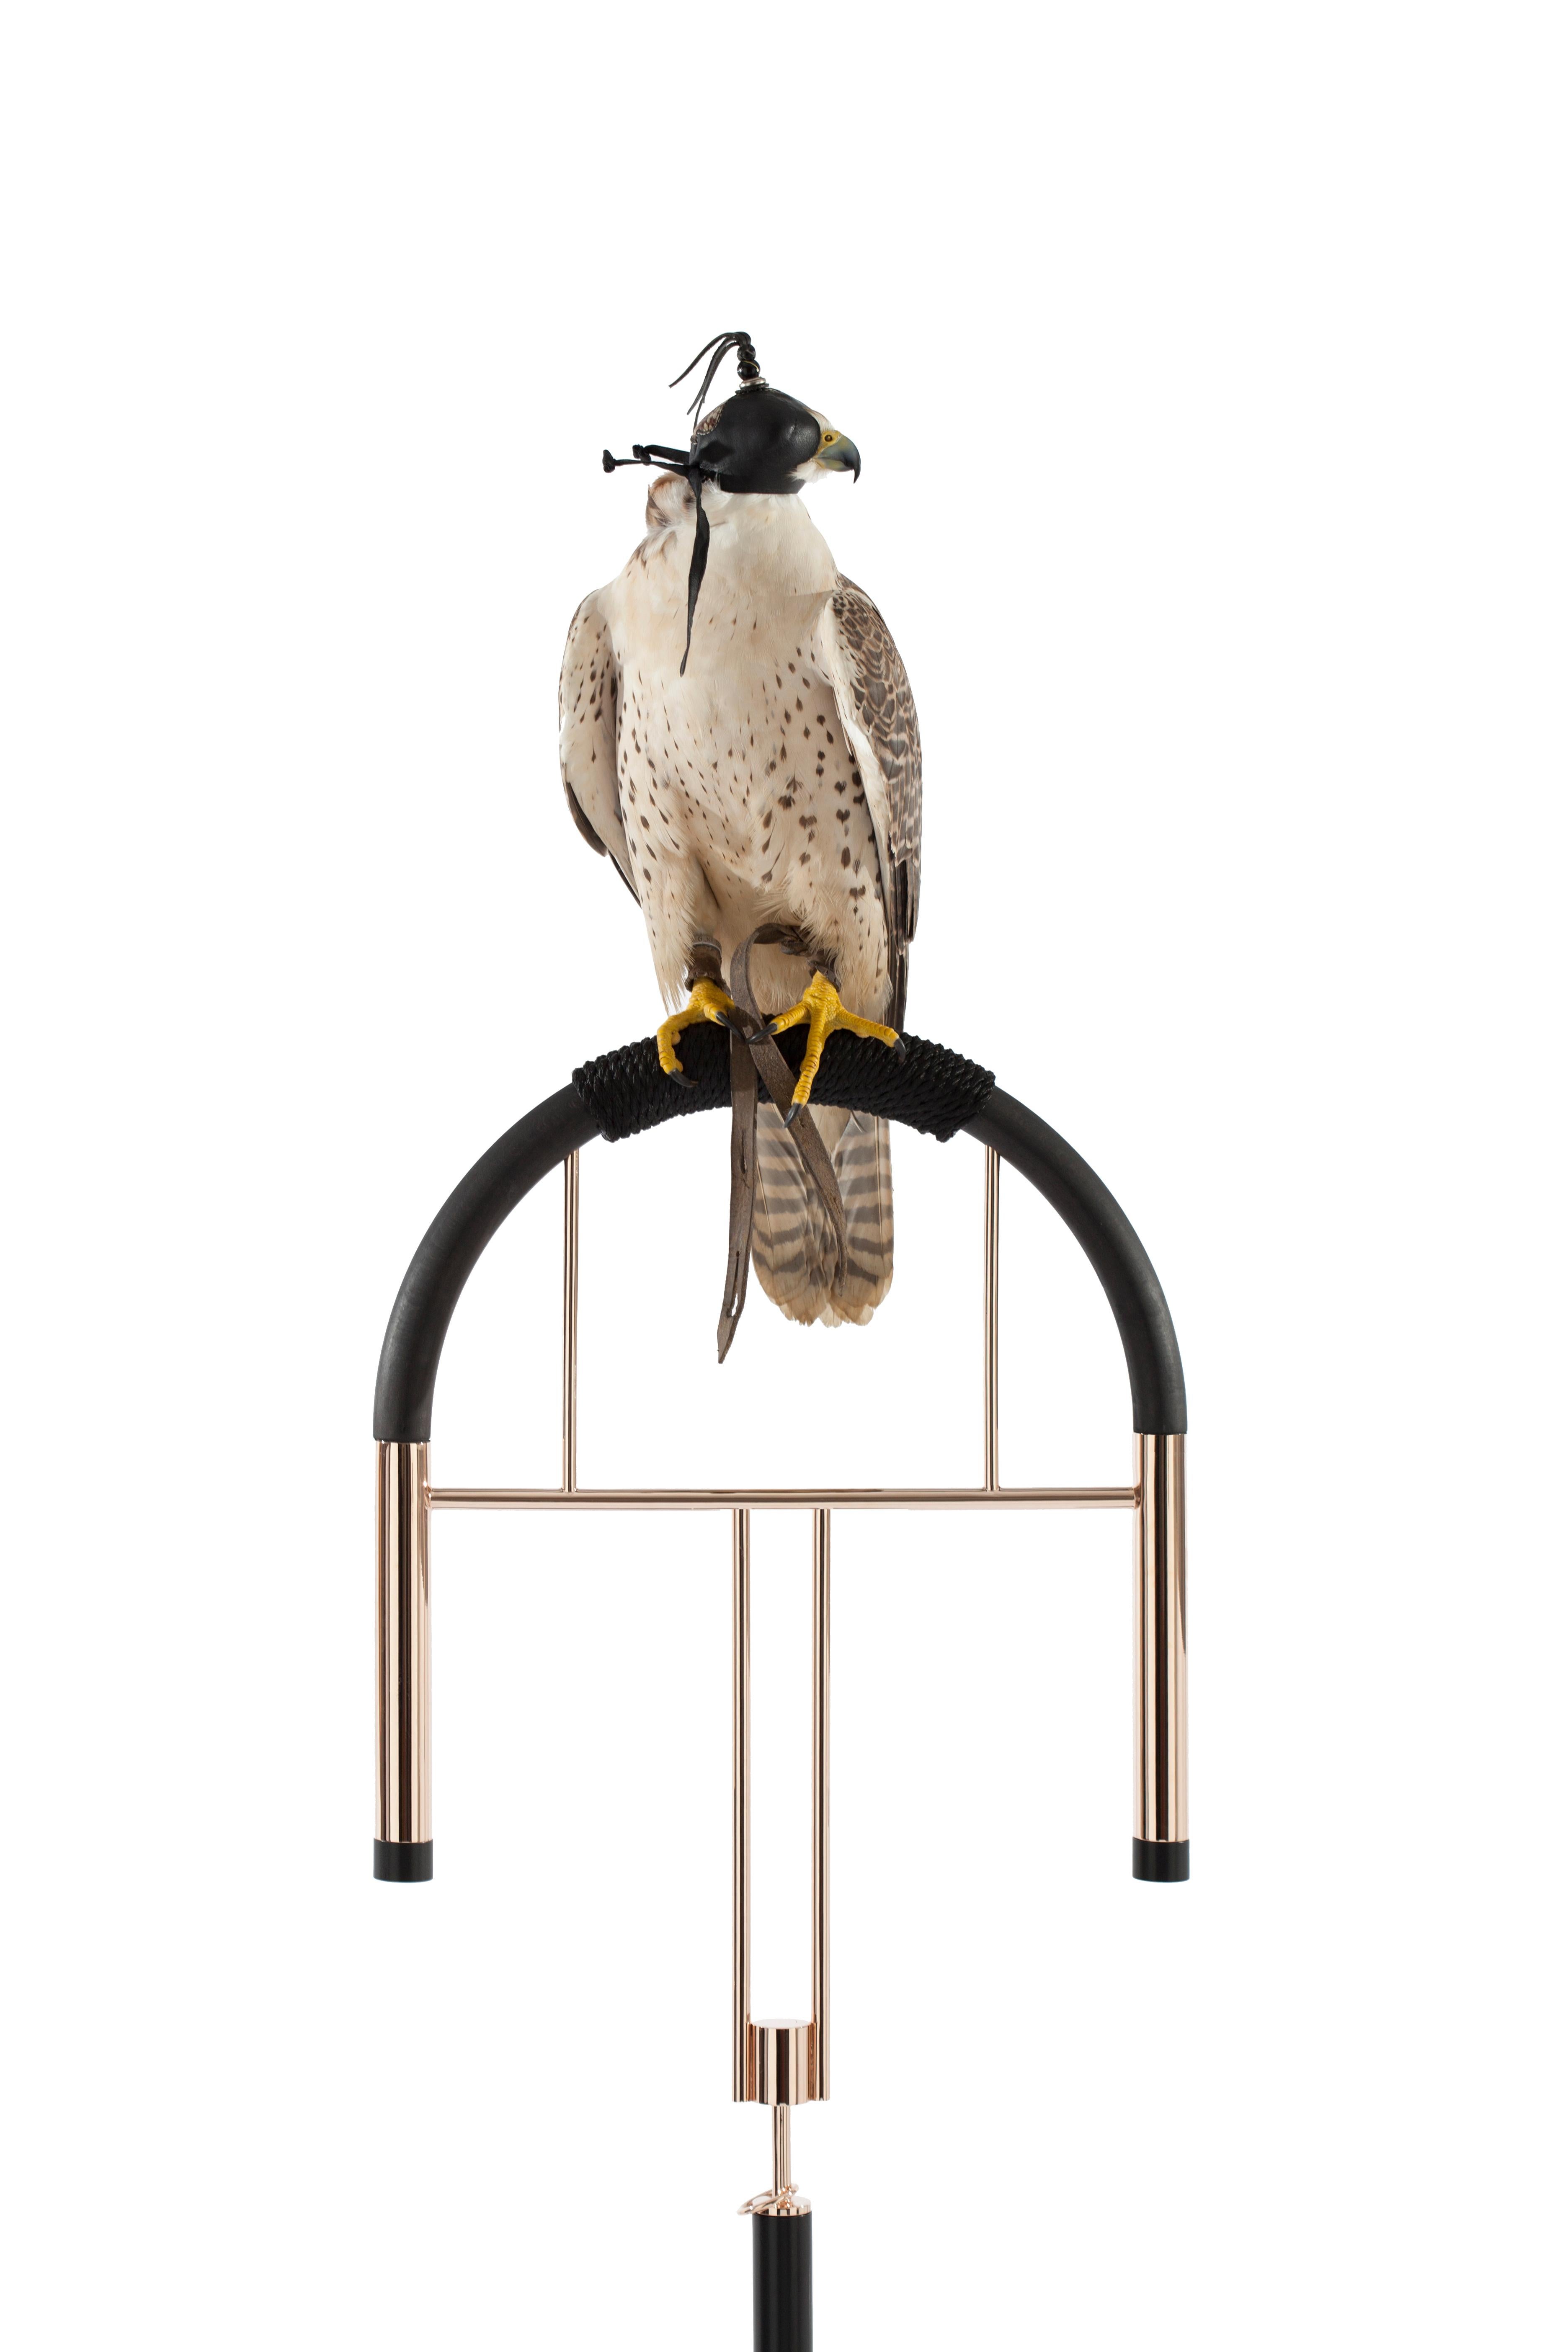 Posa Project, in collaboration with Carwan Gallery, combines volumes and geometric forms adapted to precise technical requirements. This new interpretation of falcon perches comes directly from the original aesthetical criterions and combined with